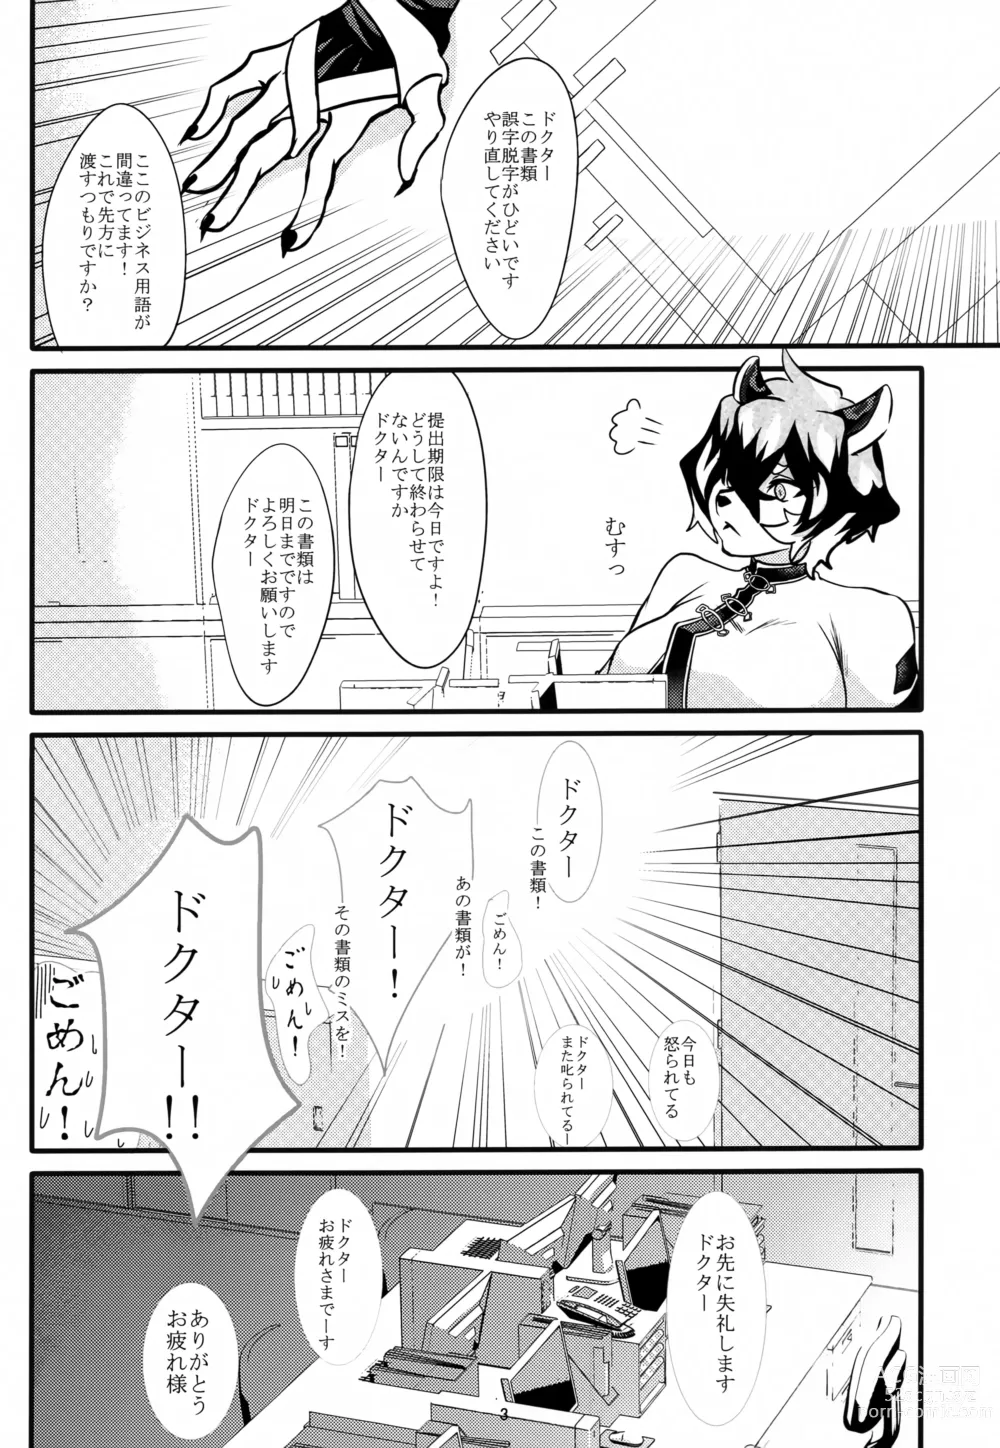 Page 3 of doujinshi Rhodes Gift